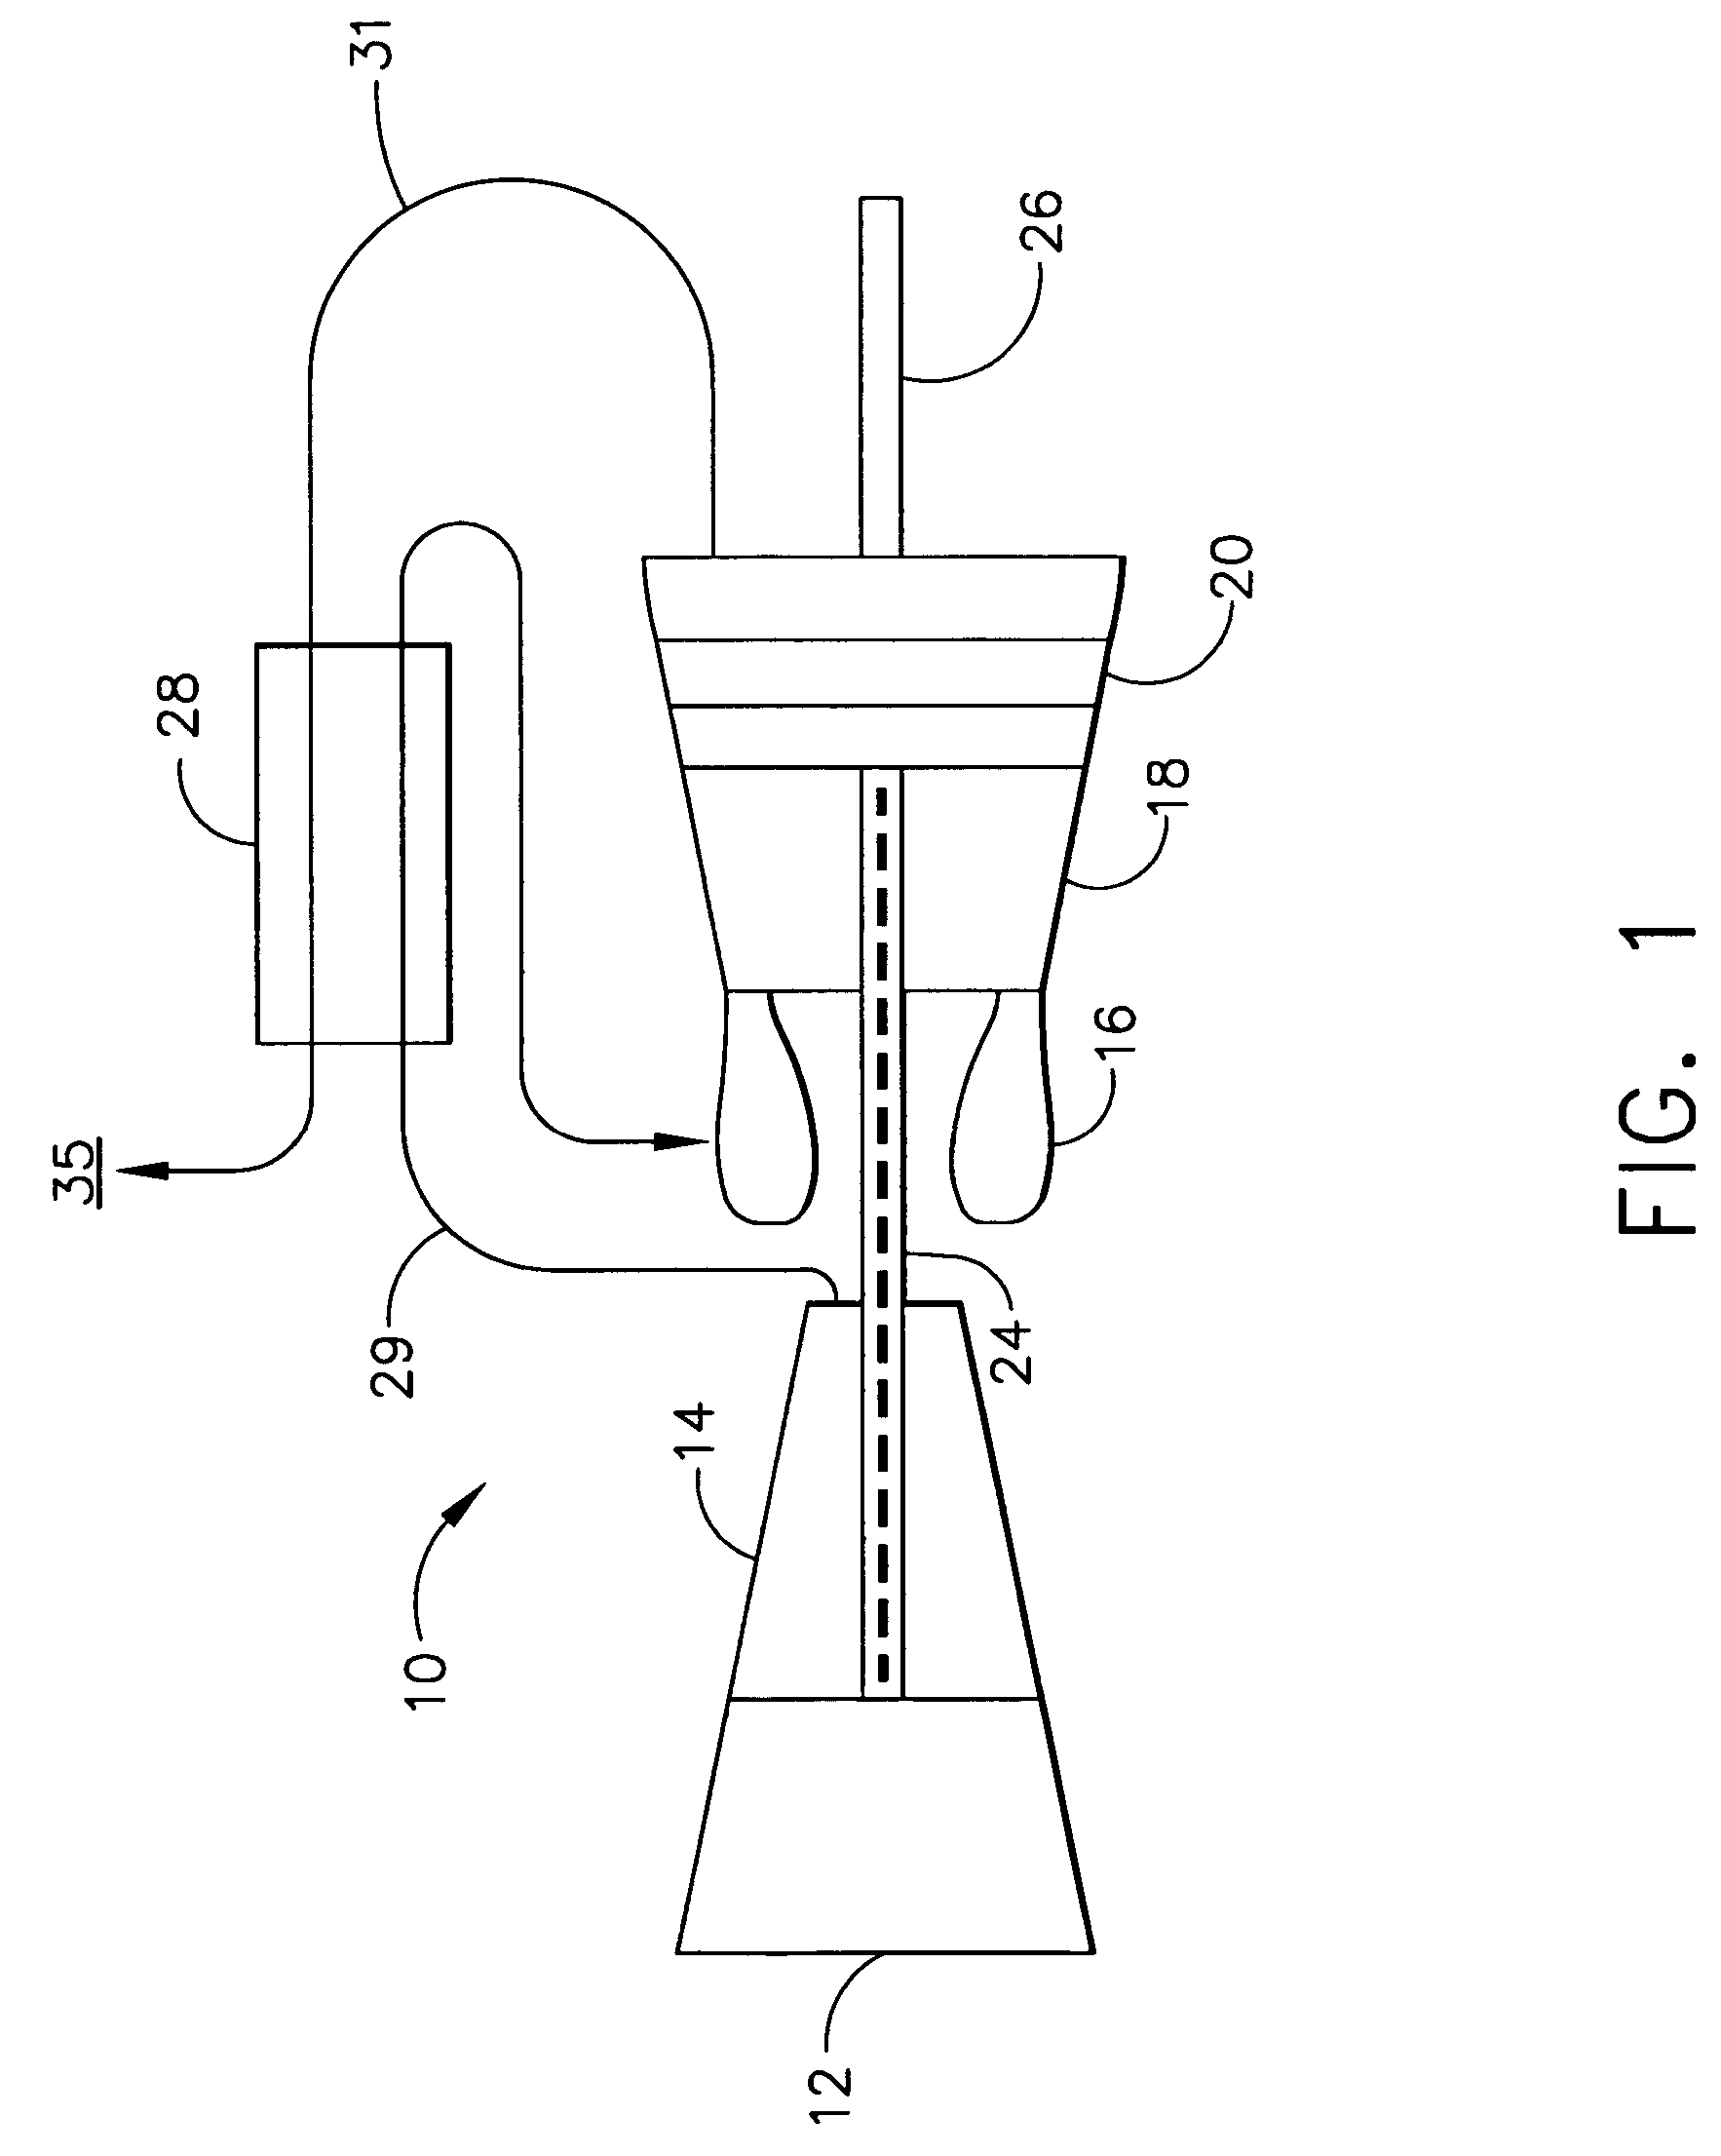 Methods and apparatus for cooling turbine engine combustor exit temperatures